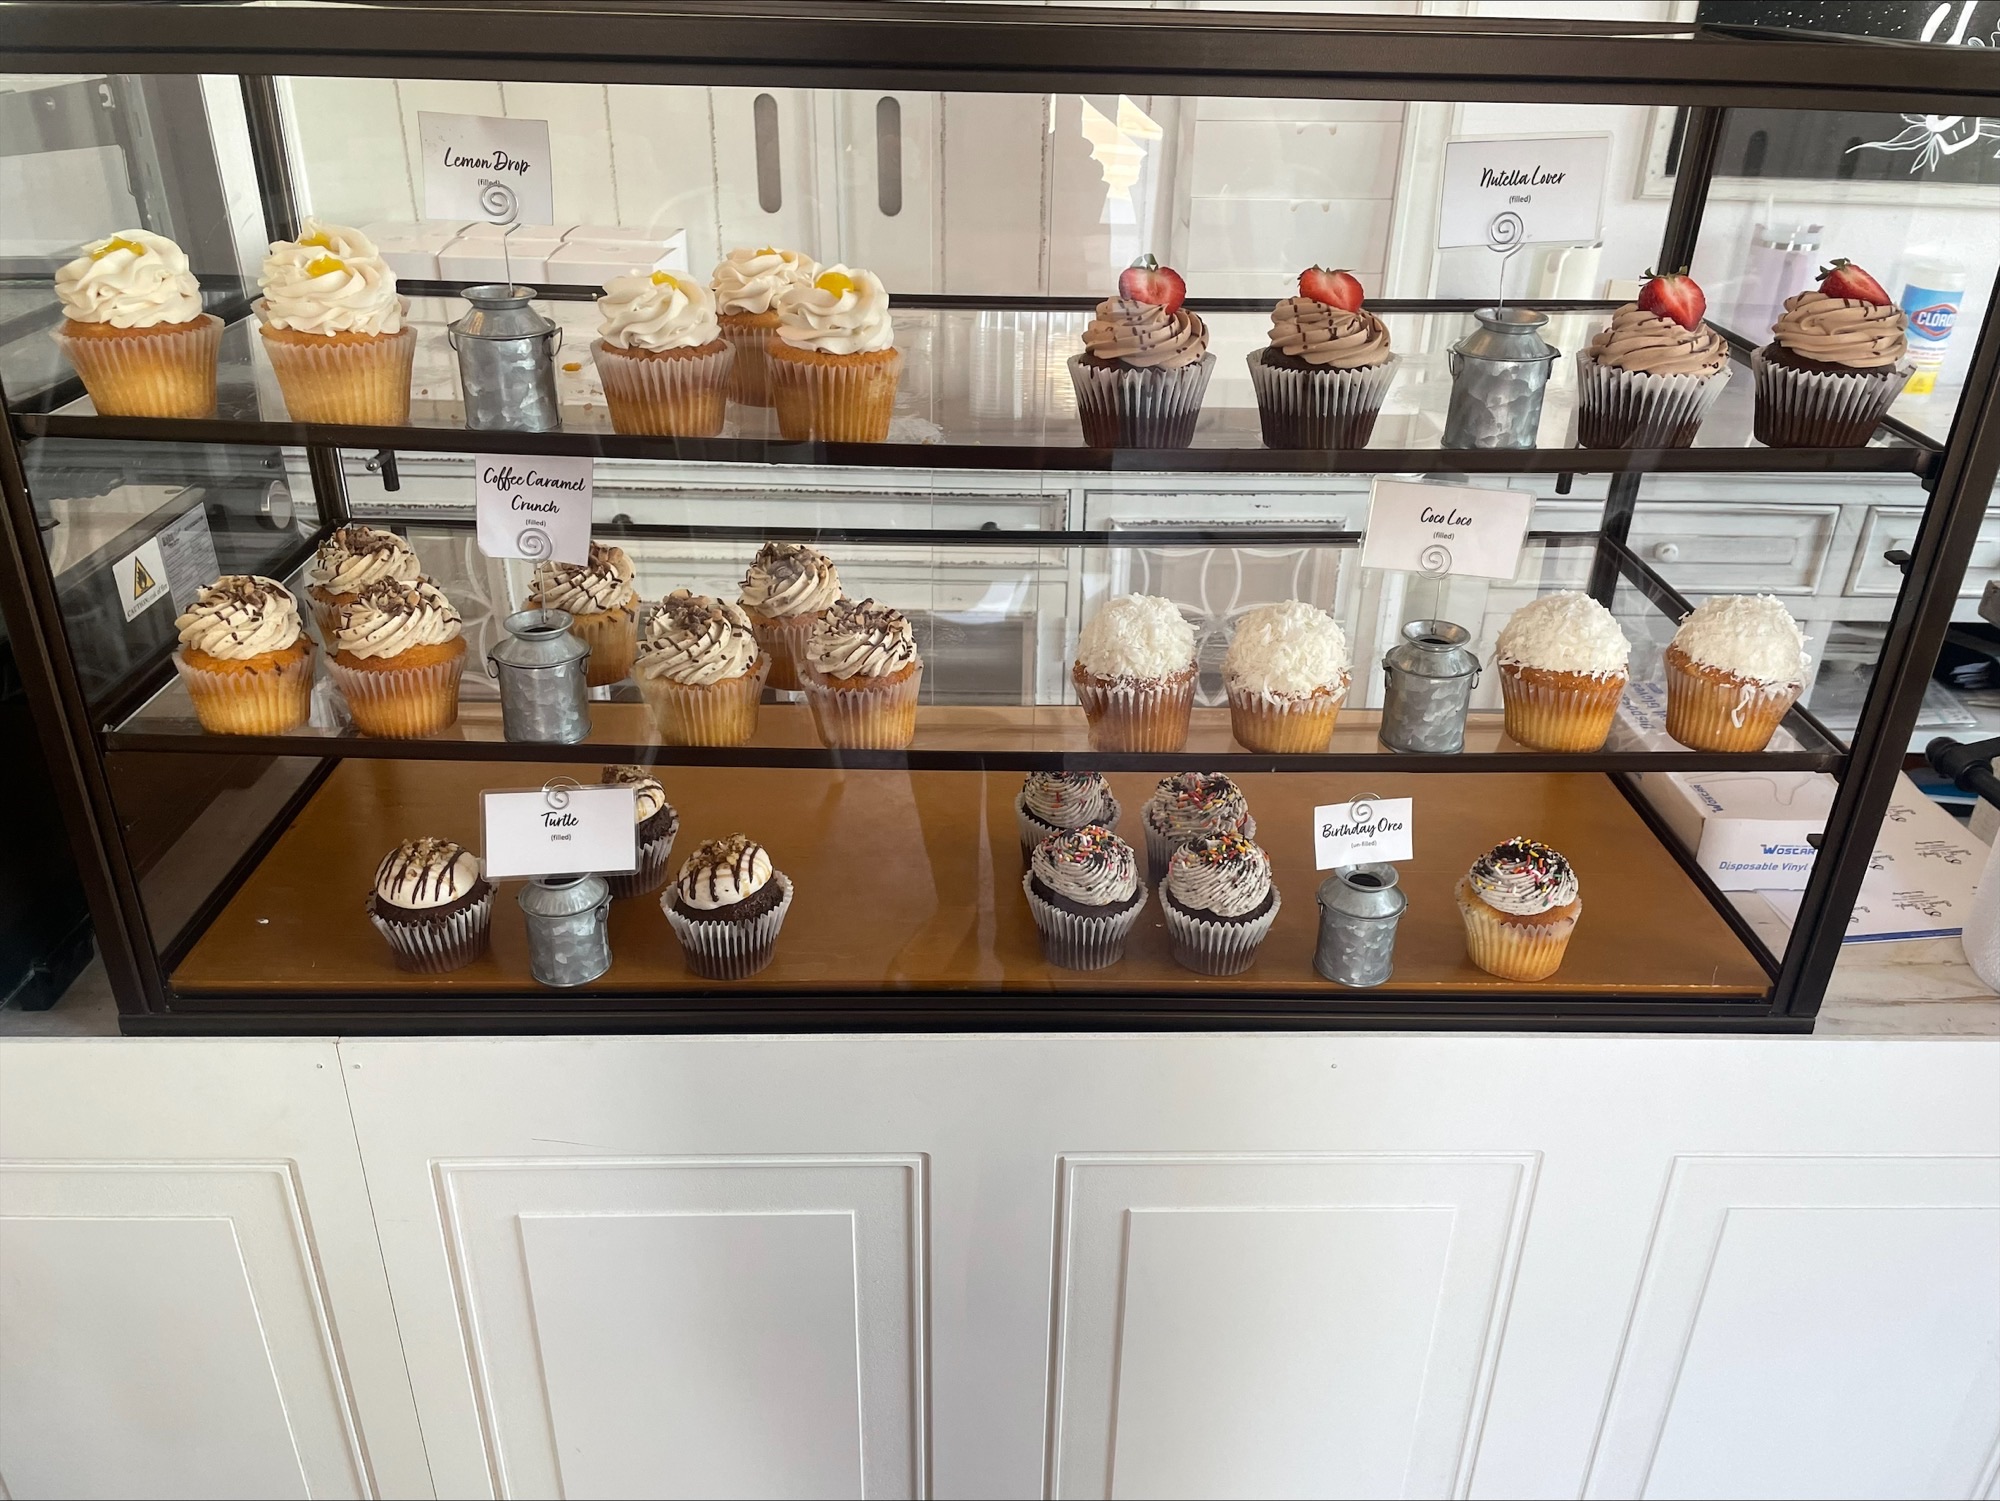 A glass case full of cupcakes from Sweet & Simple.